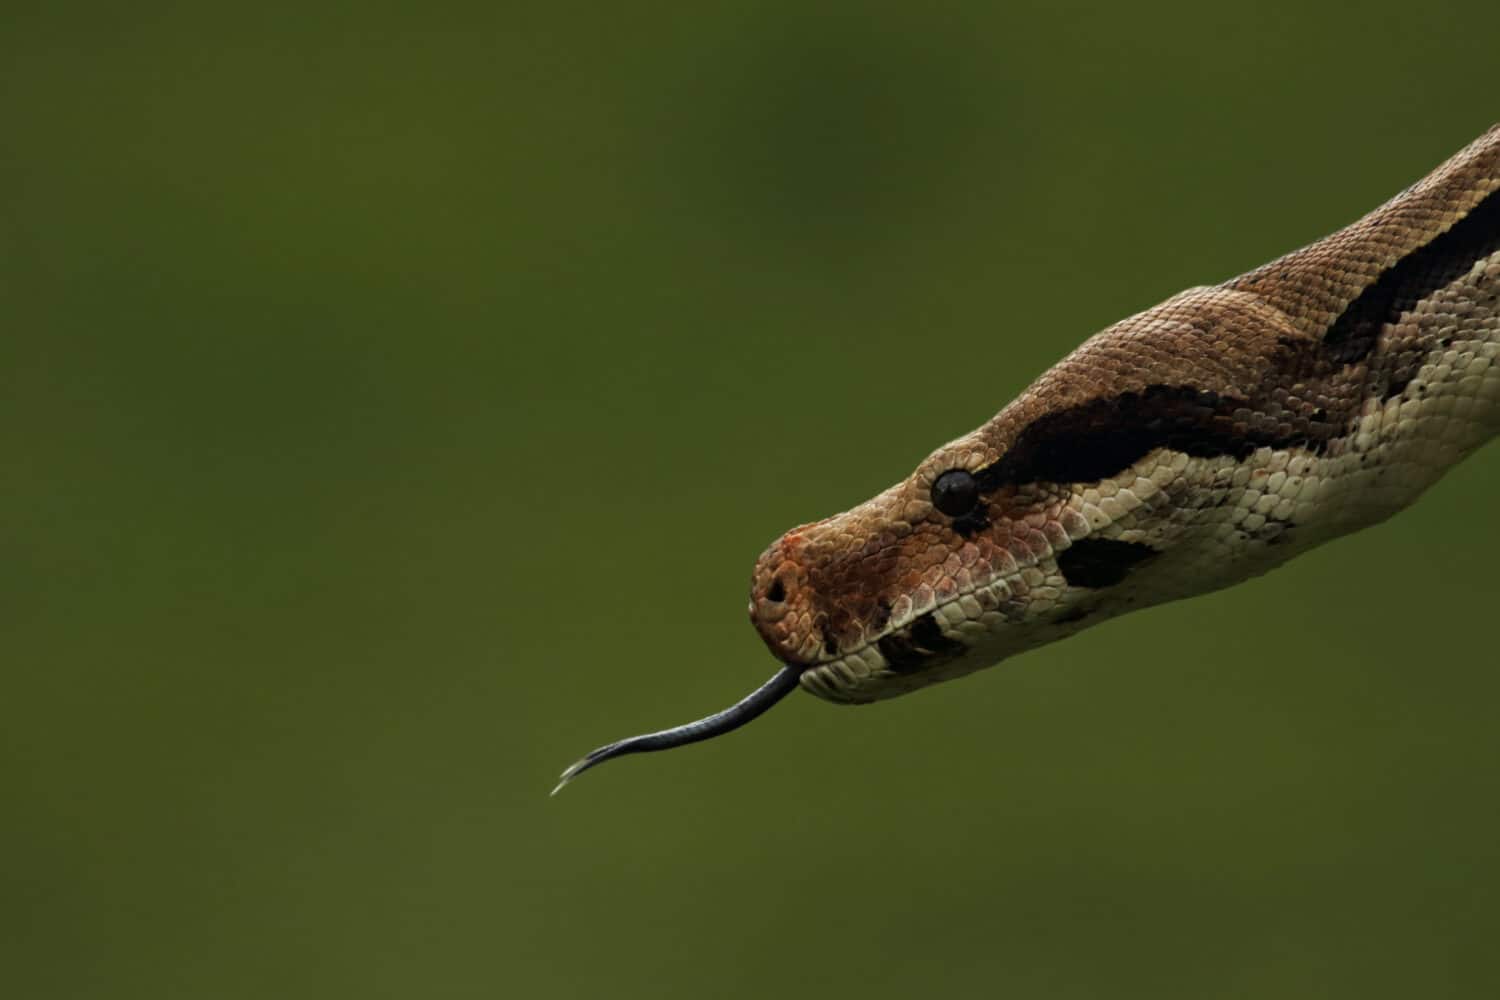 The boa constrictor (Boa constrictor), also called the red-tailed boa or the common boa, portrait in green forest. Green background.